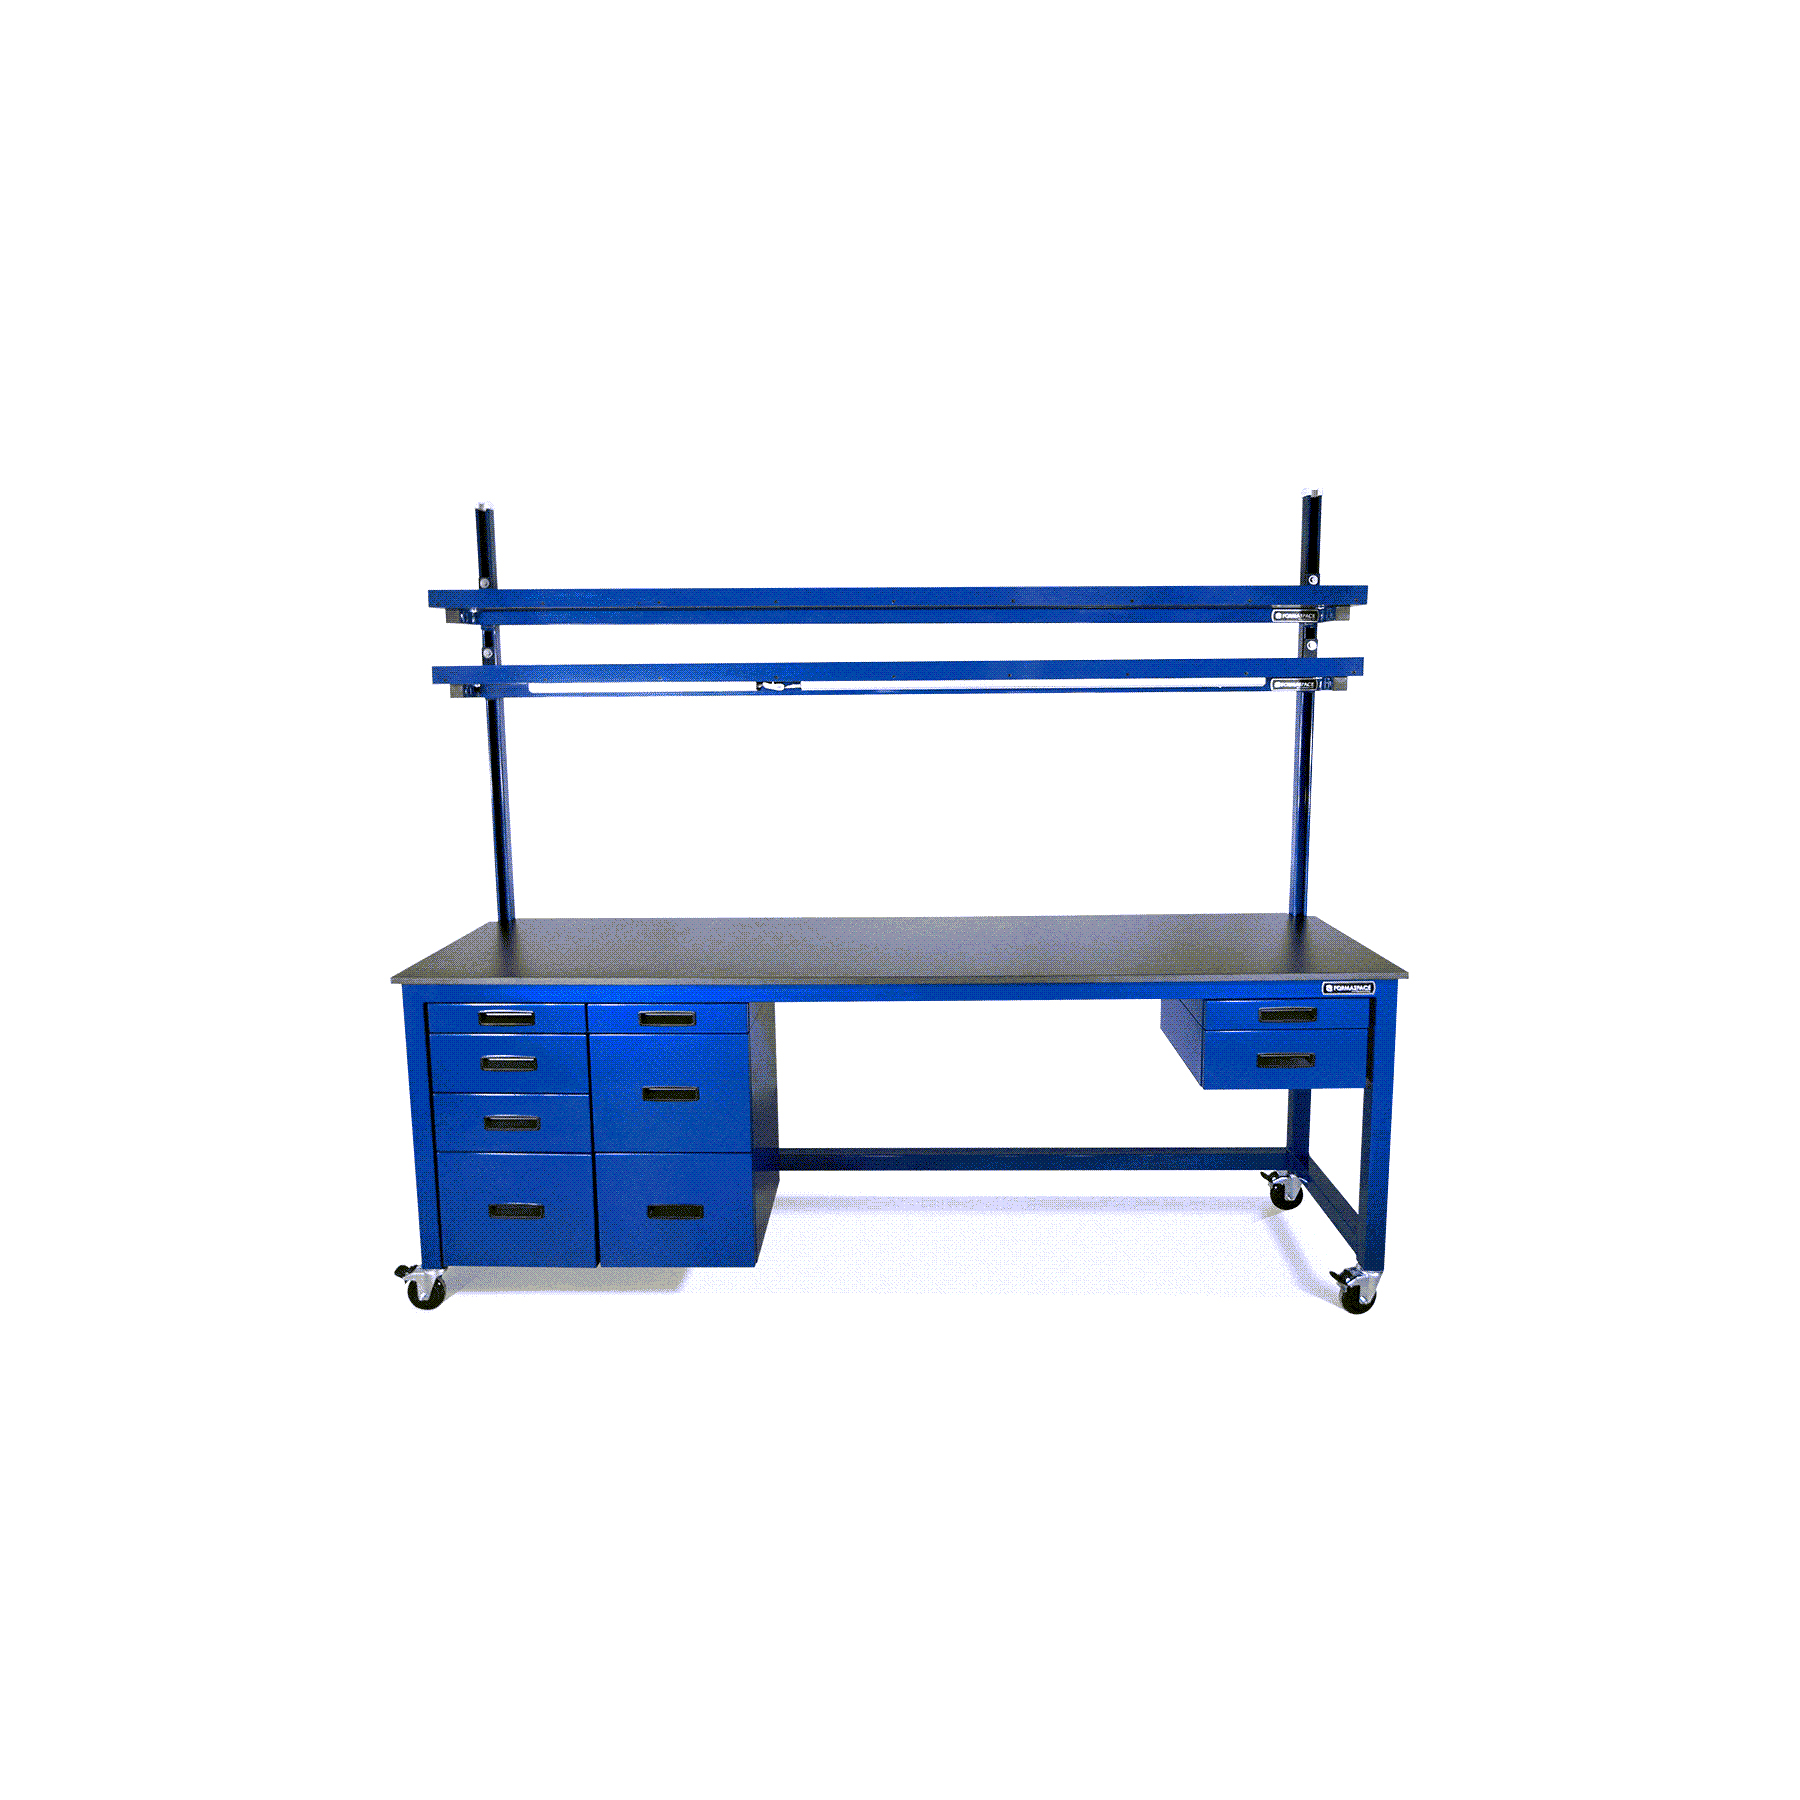 workbench for labs science research mobile with lockable wheels multiple drawers and overhead lighting customizable